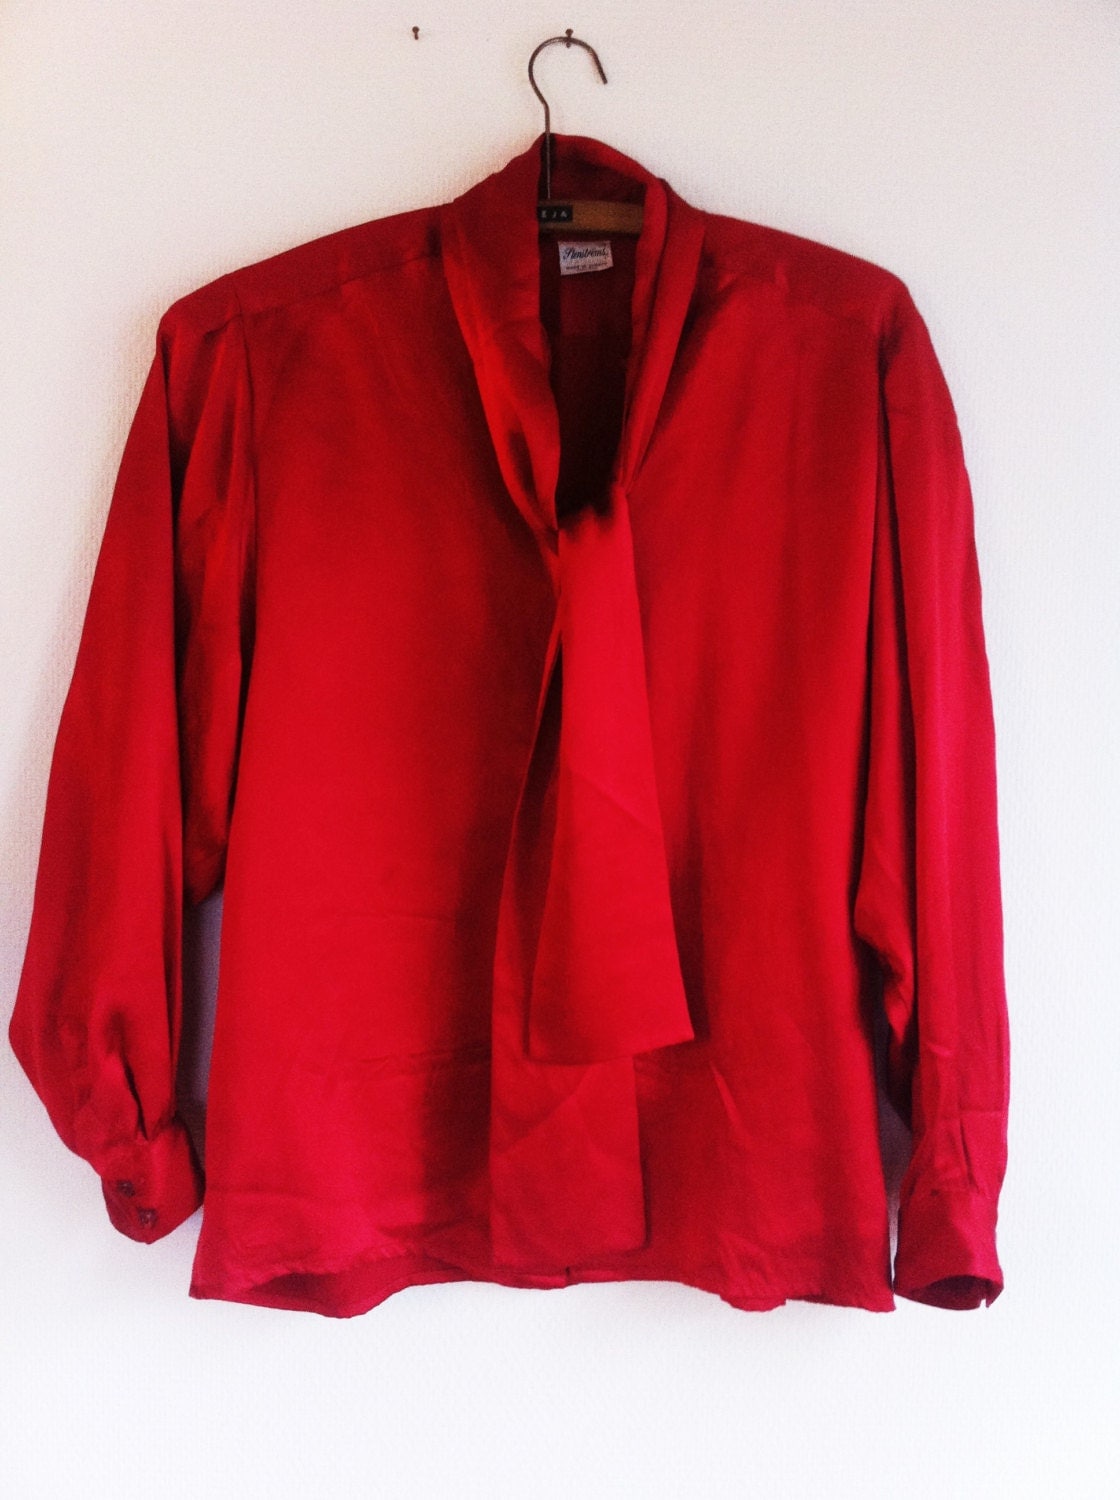 Red pure silk blouse with tie / bow size by HandsOfLightVintage